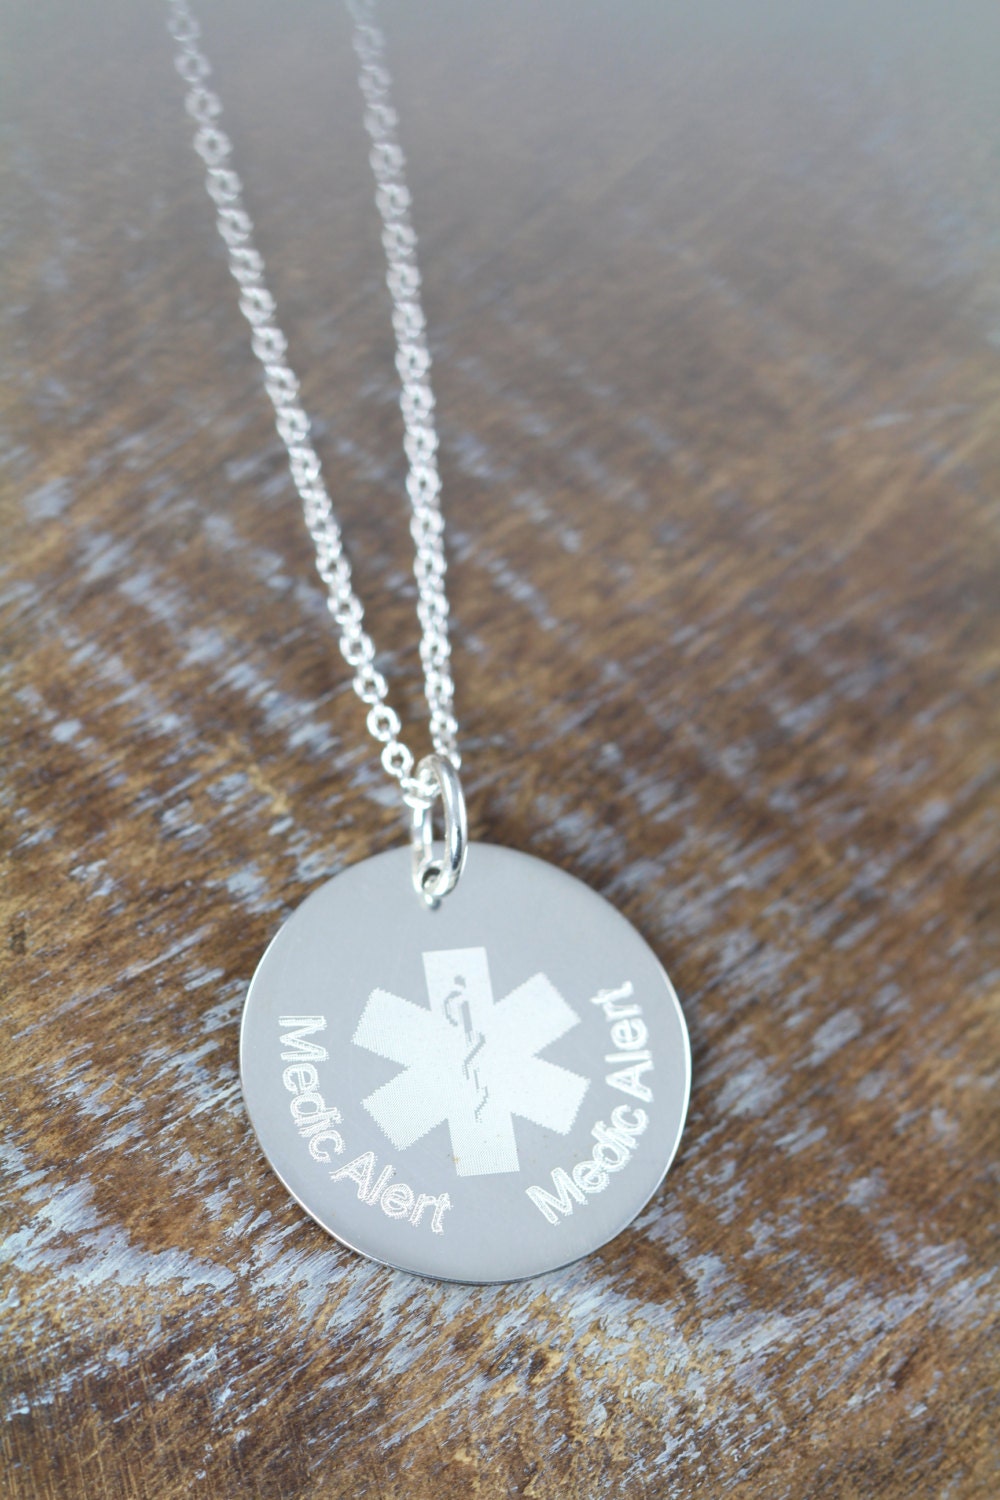 Medical Alert Jewelry Custom Engraved by ShinyLittleBlessings